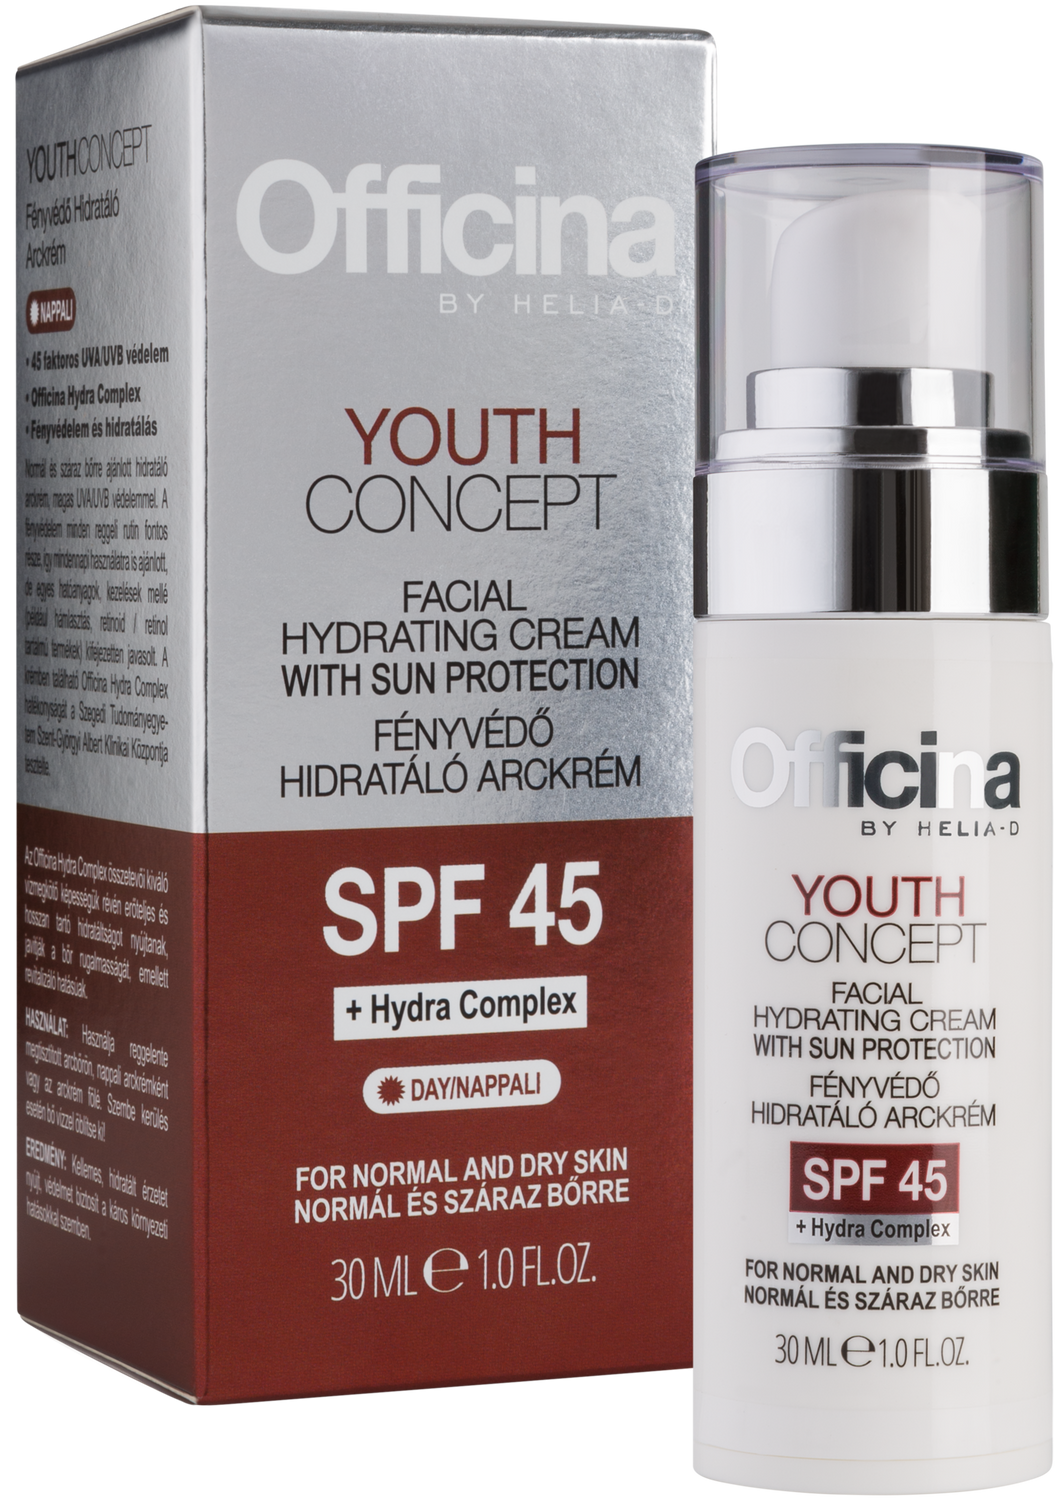 Officina by Helia-D Youth Concept Facial Hydrating Cream With Sun Protection 30ml